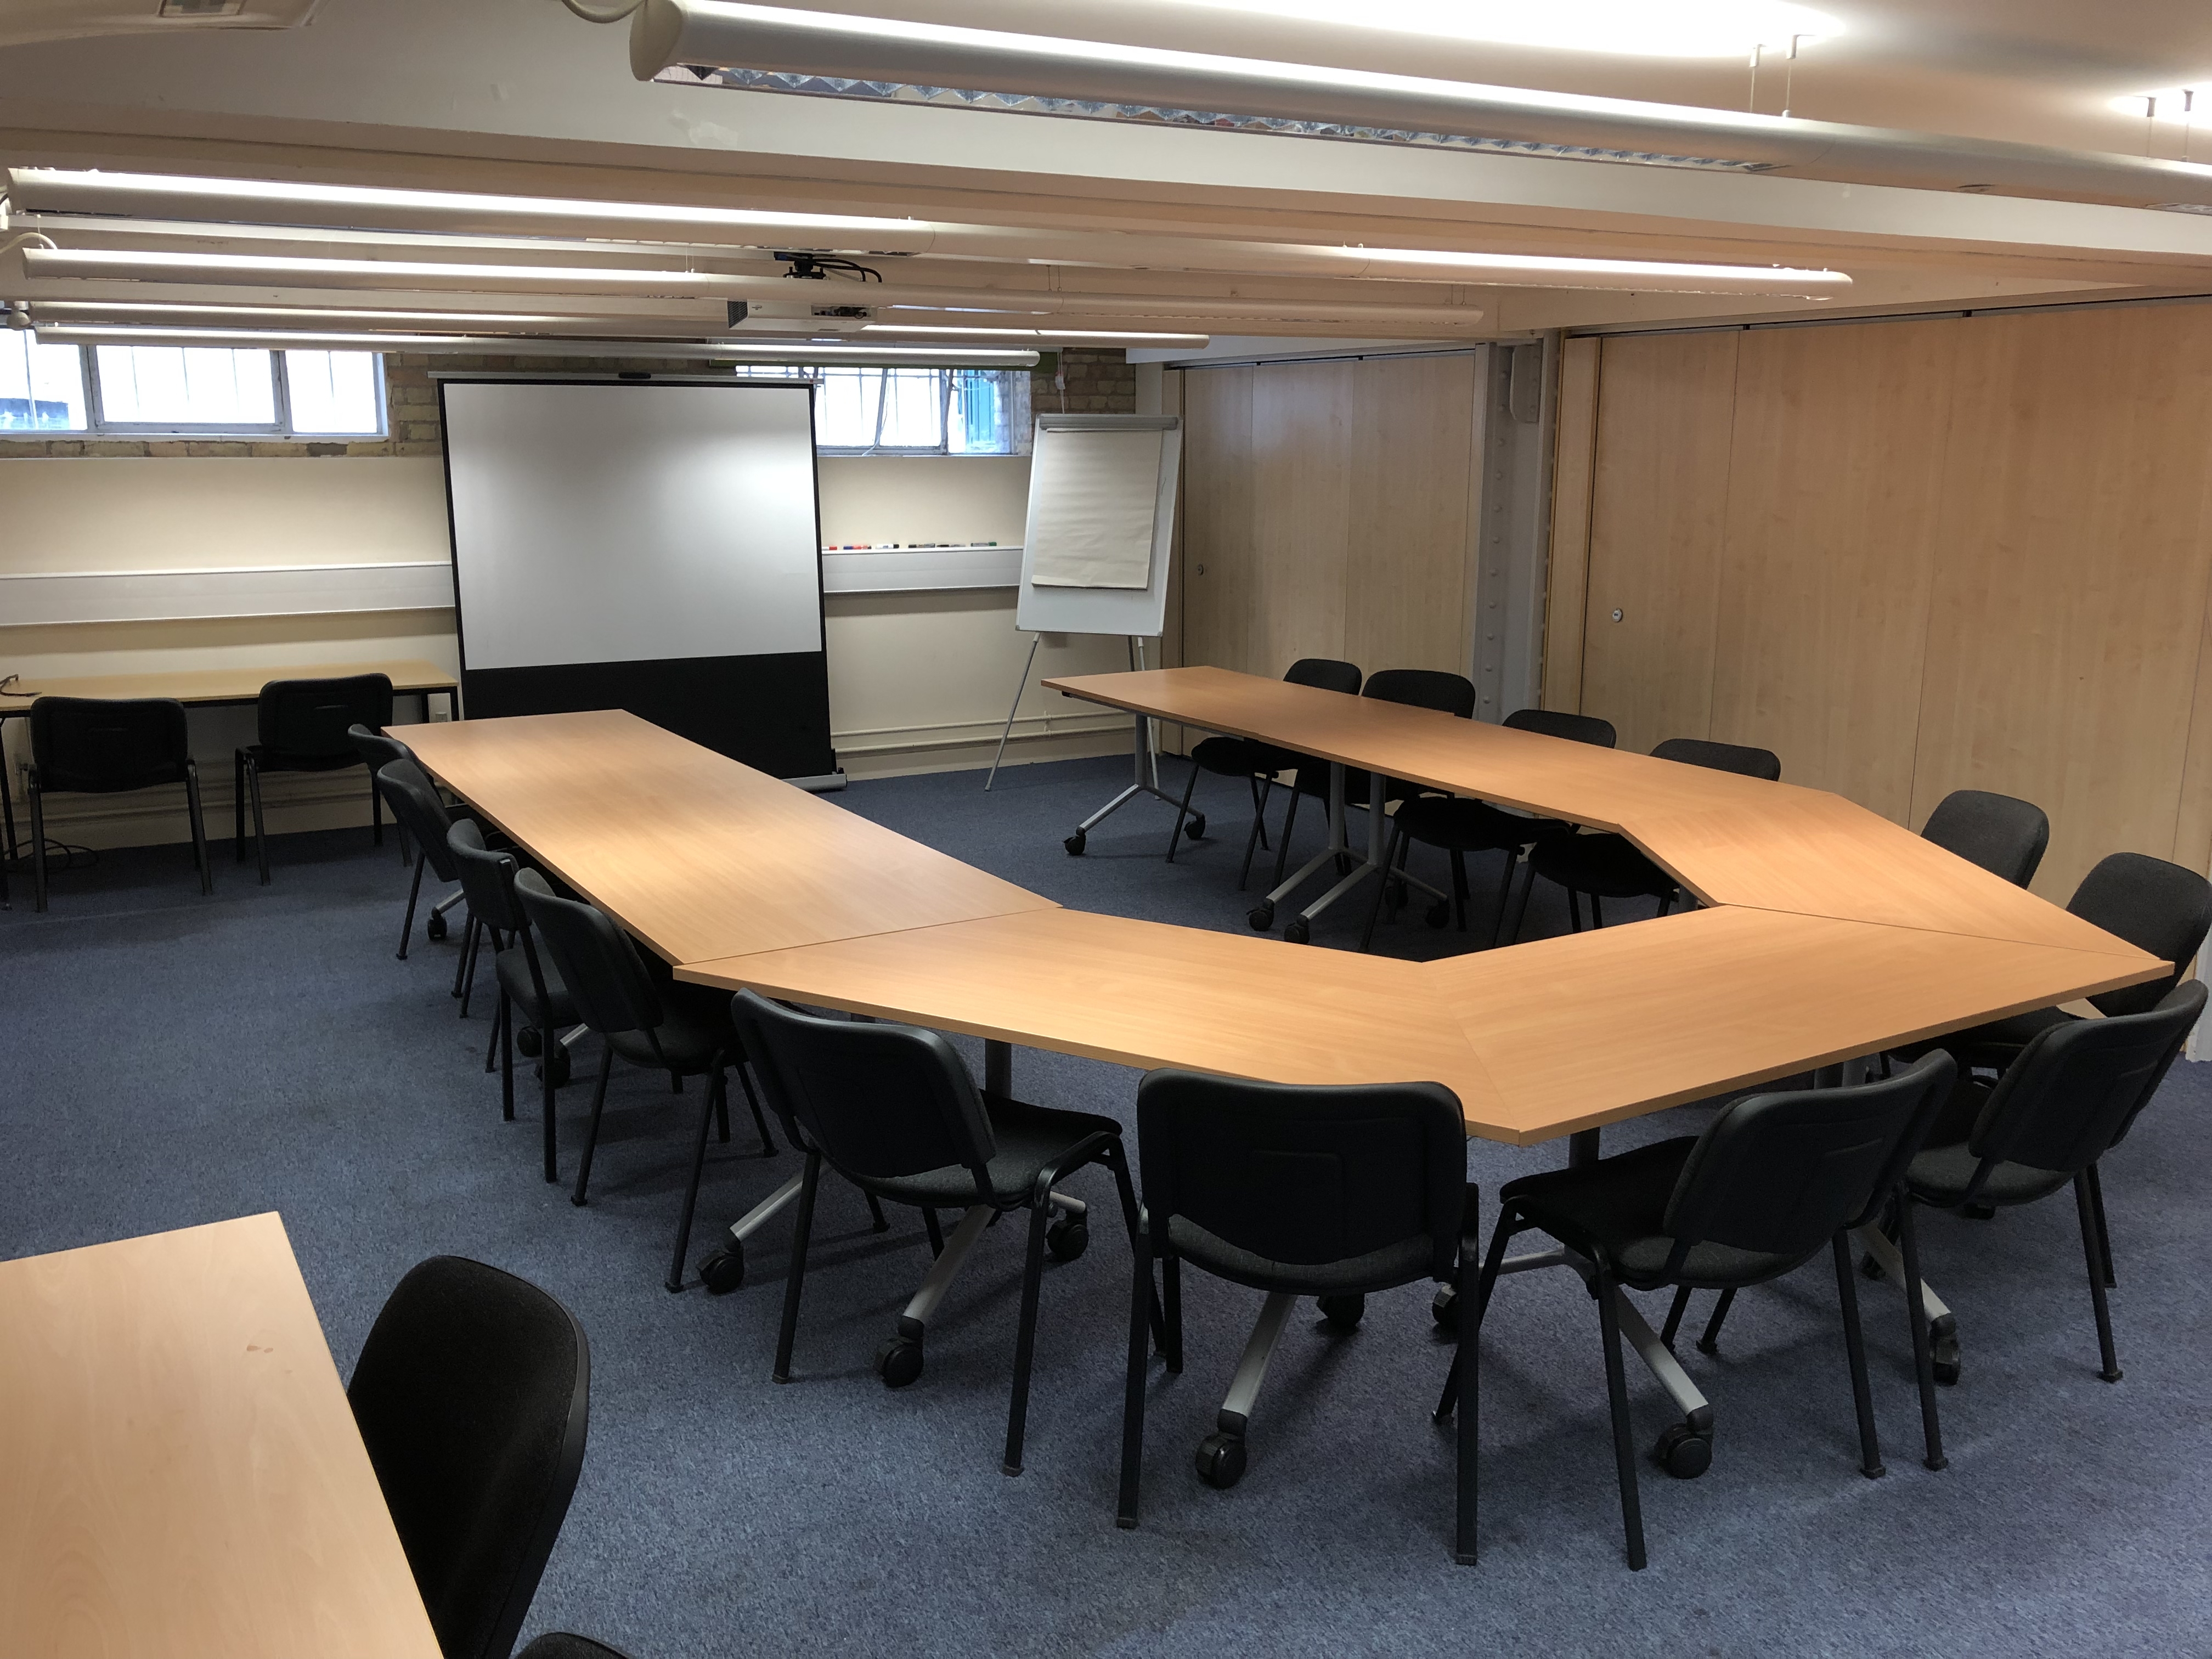 Photograph showing the standard layout of the Mill Lane Seminar Room - a room with fourteen chairs around a large boardroom table, with a projector screen on the end wall.